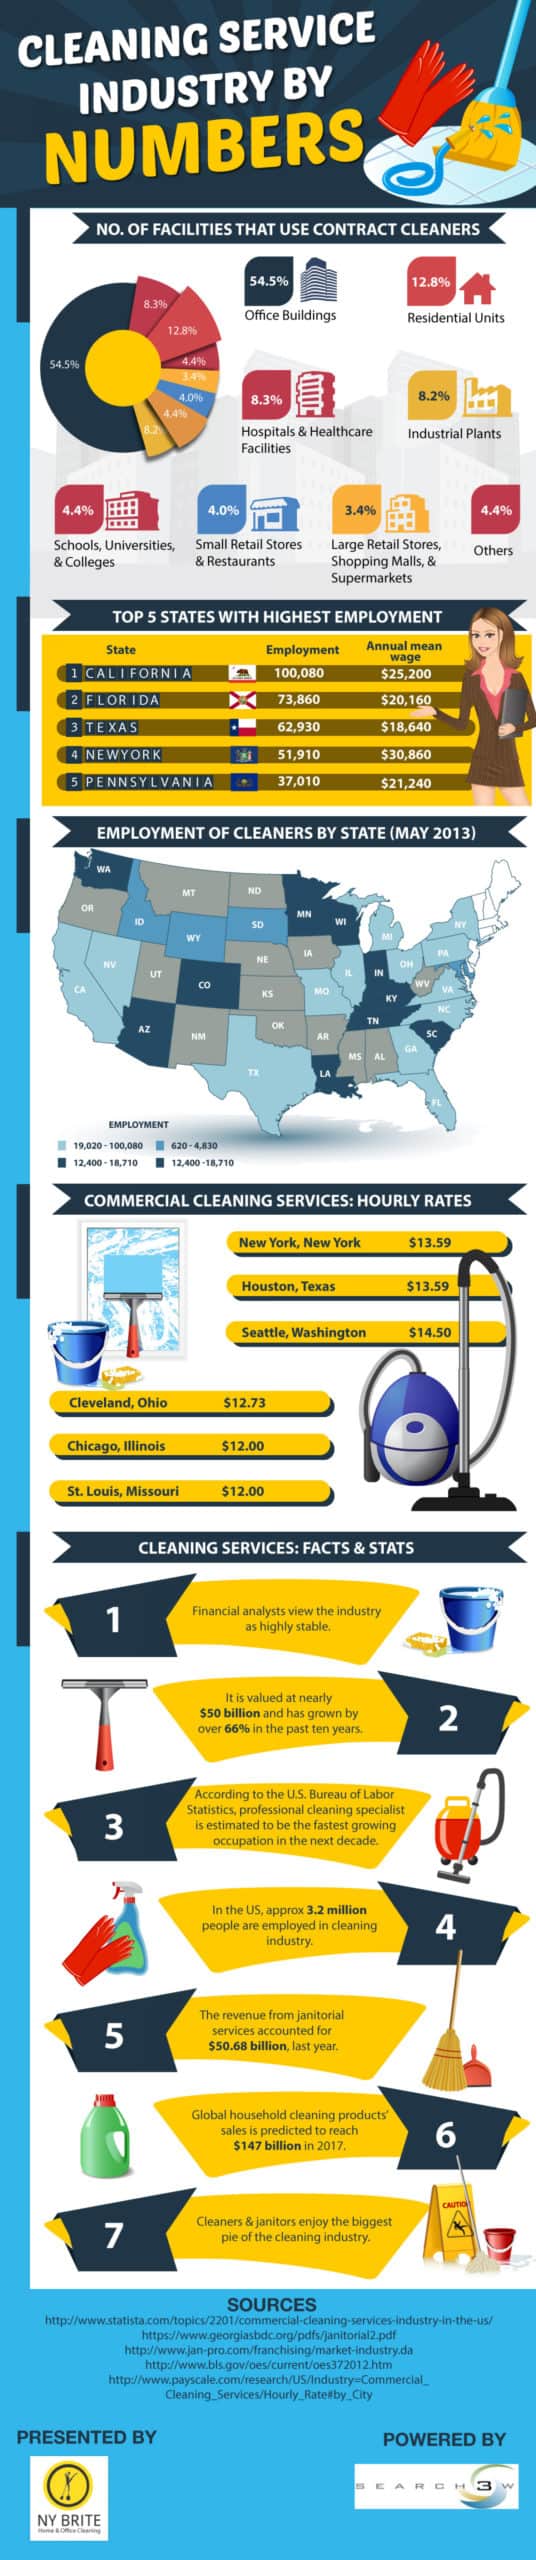 cleaning service industry statistics